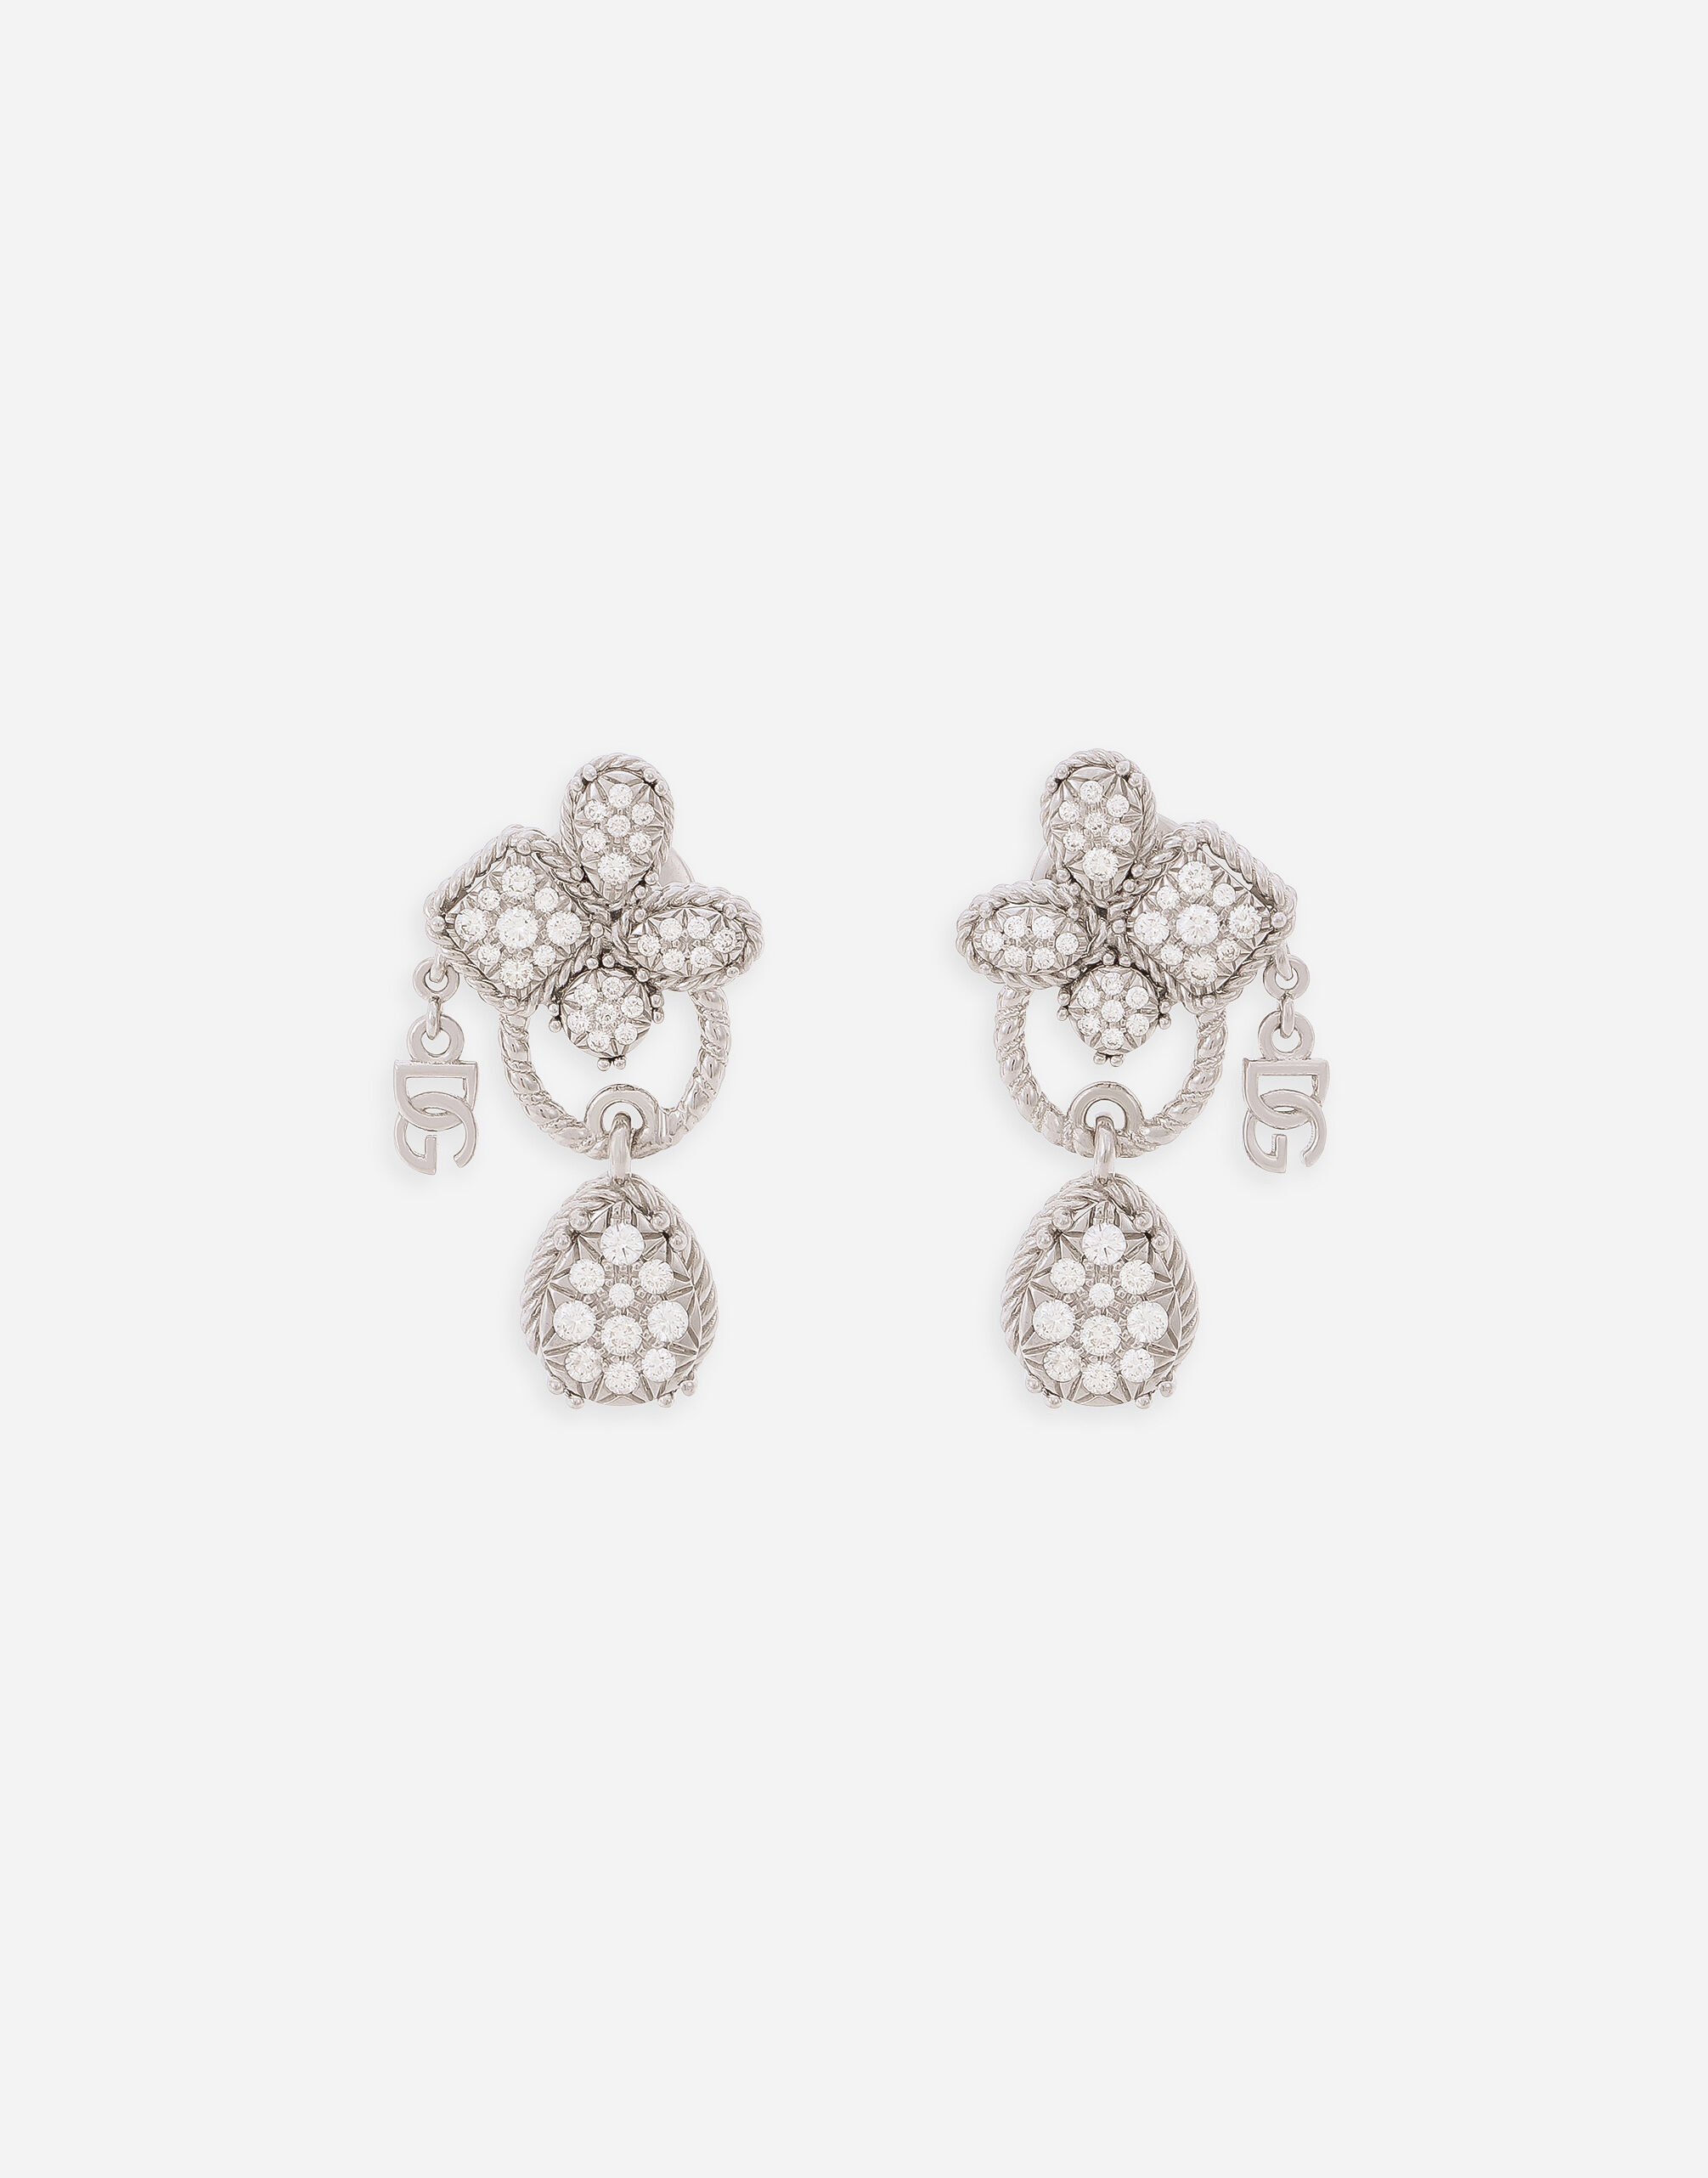 Dolce & Gabbana Easy Diamond earrings in white gold 18kt and diamonds pavé Yellow Gold WALD1GWDPEY